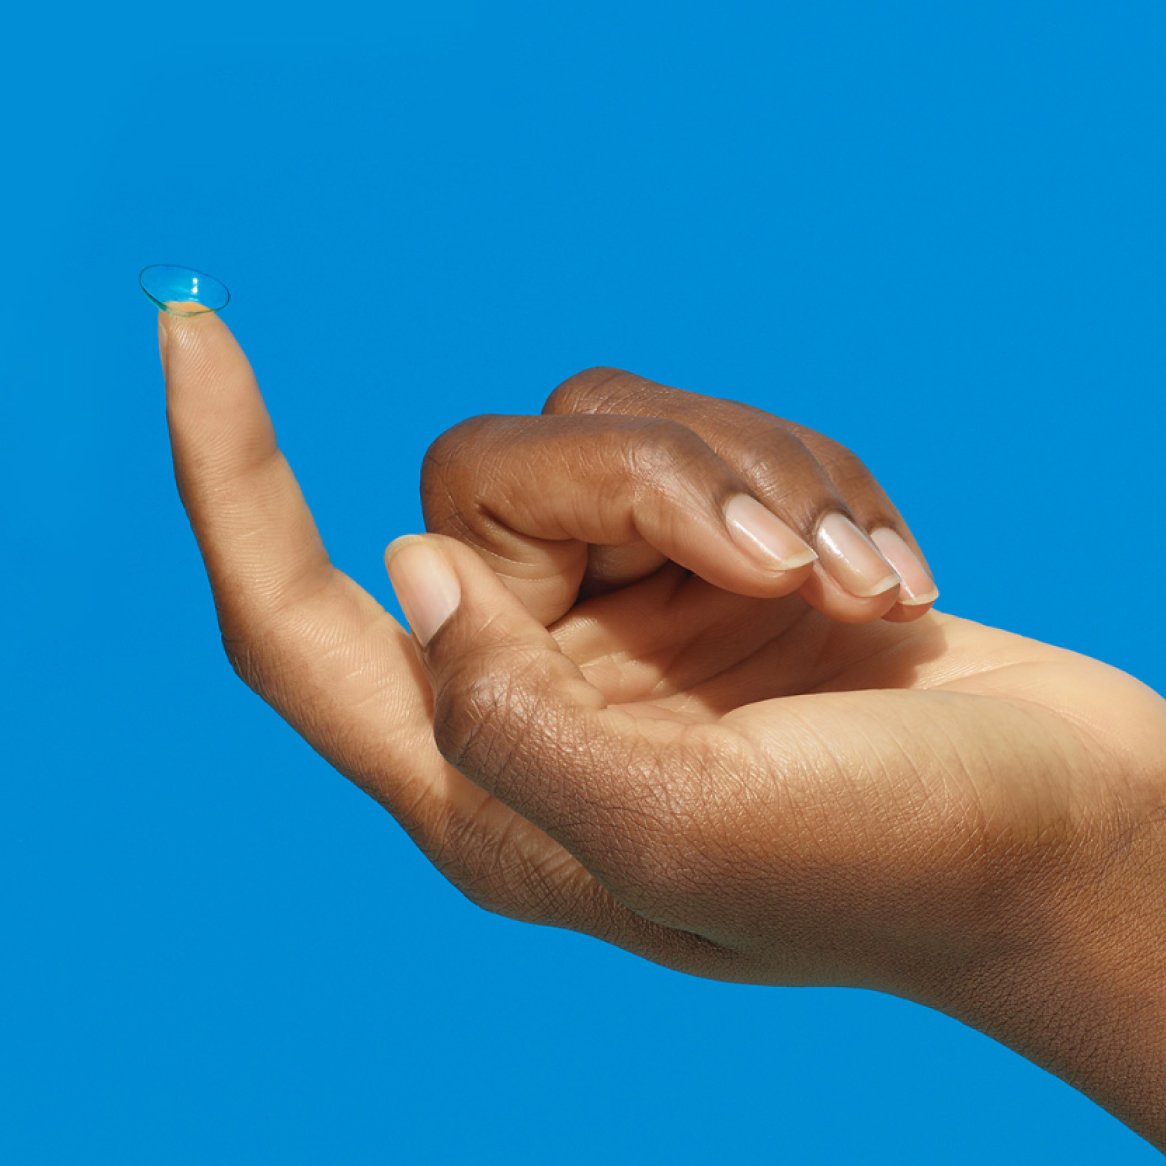 Image of a hand with contact lens on fingertip on a blue background